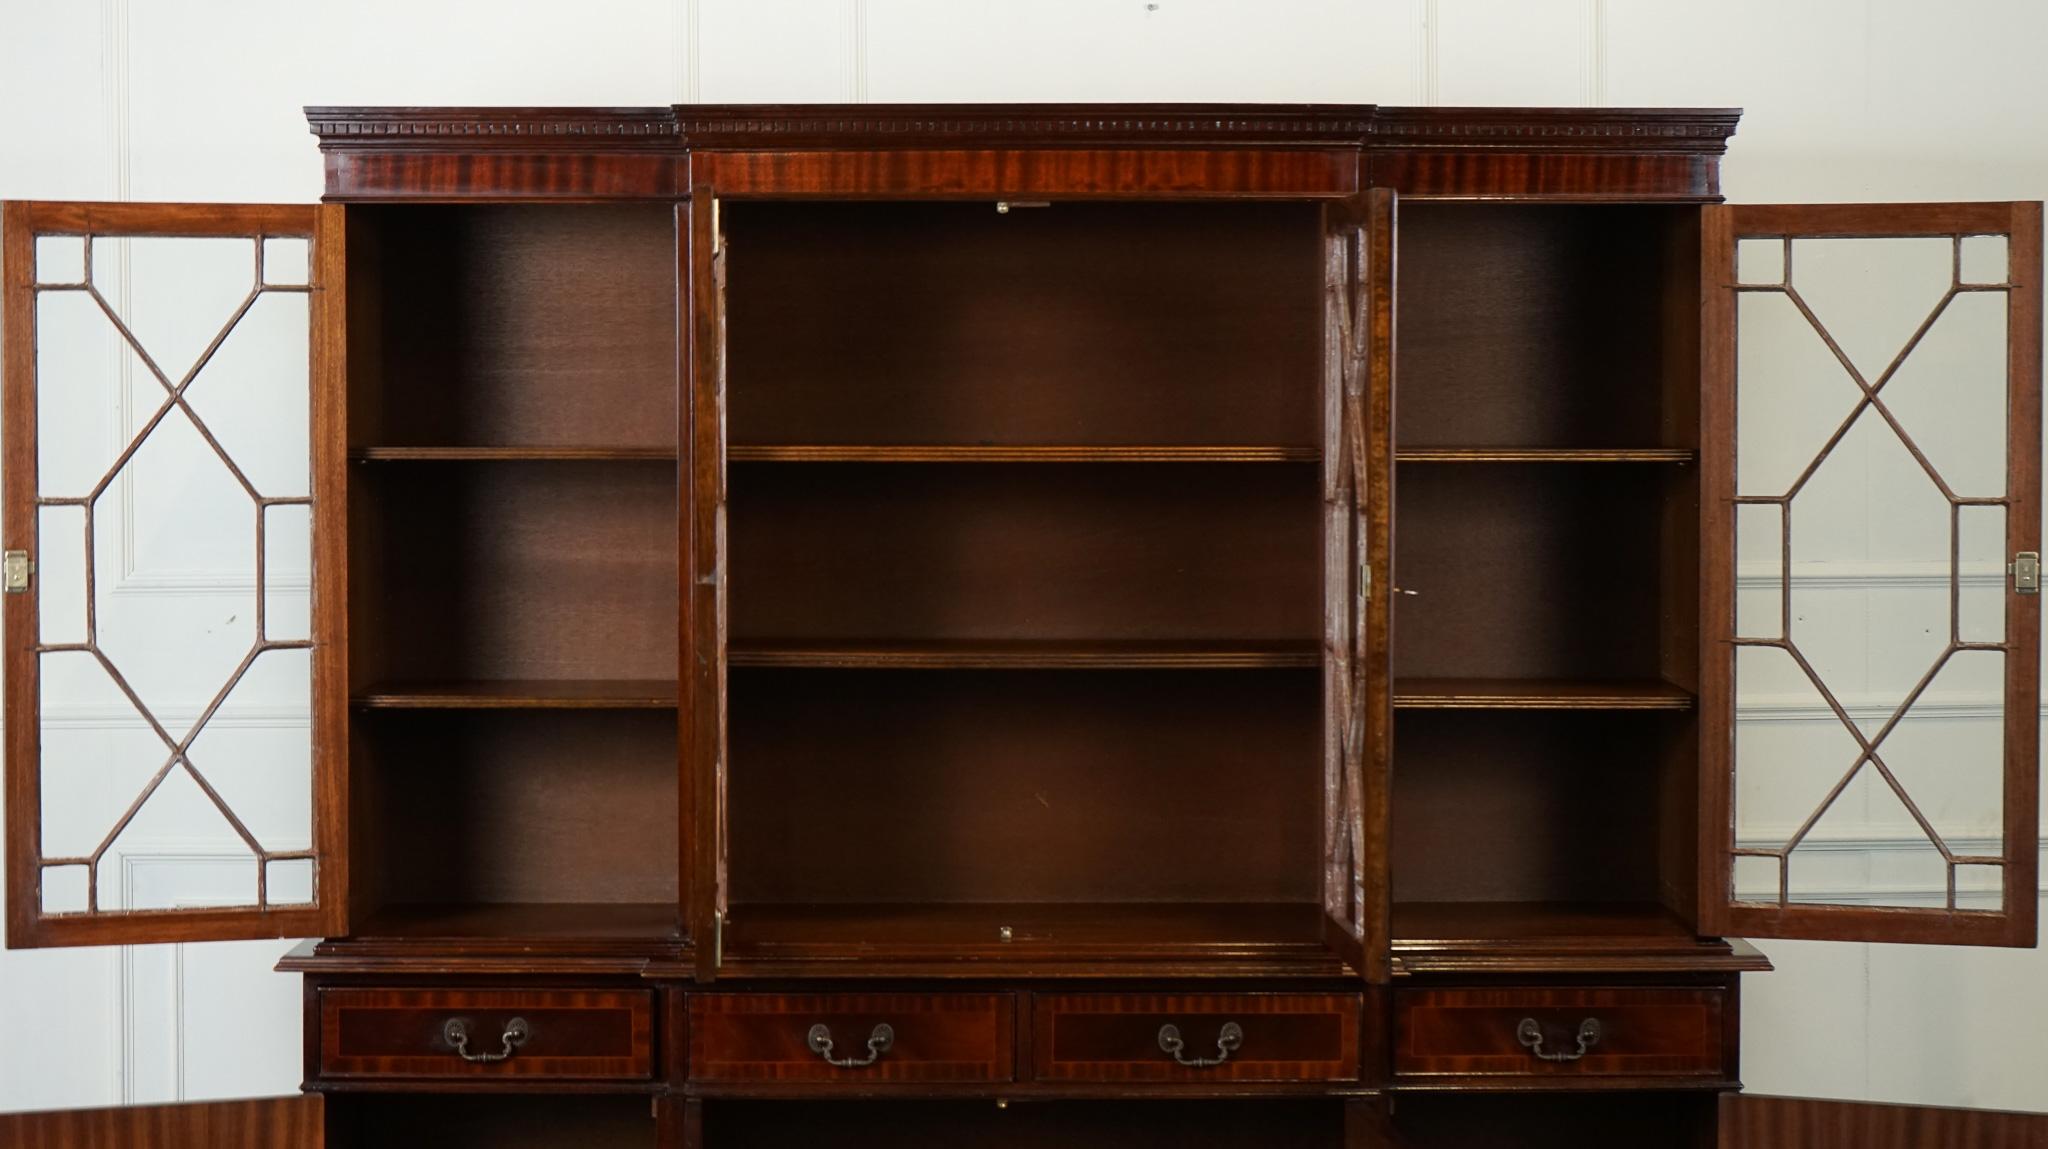 20th Century LOVELY LARGE ENGLISH FOUR DOOR GEORGiAN STYLE BREAKFRONT BOOKCASE